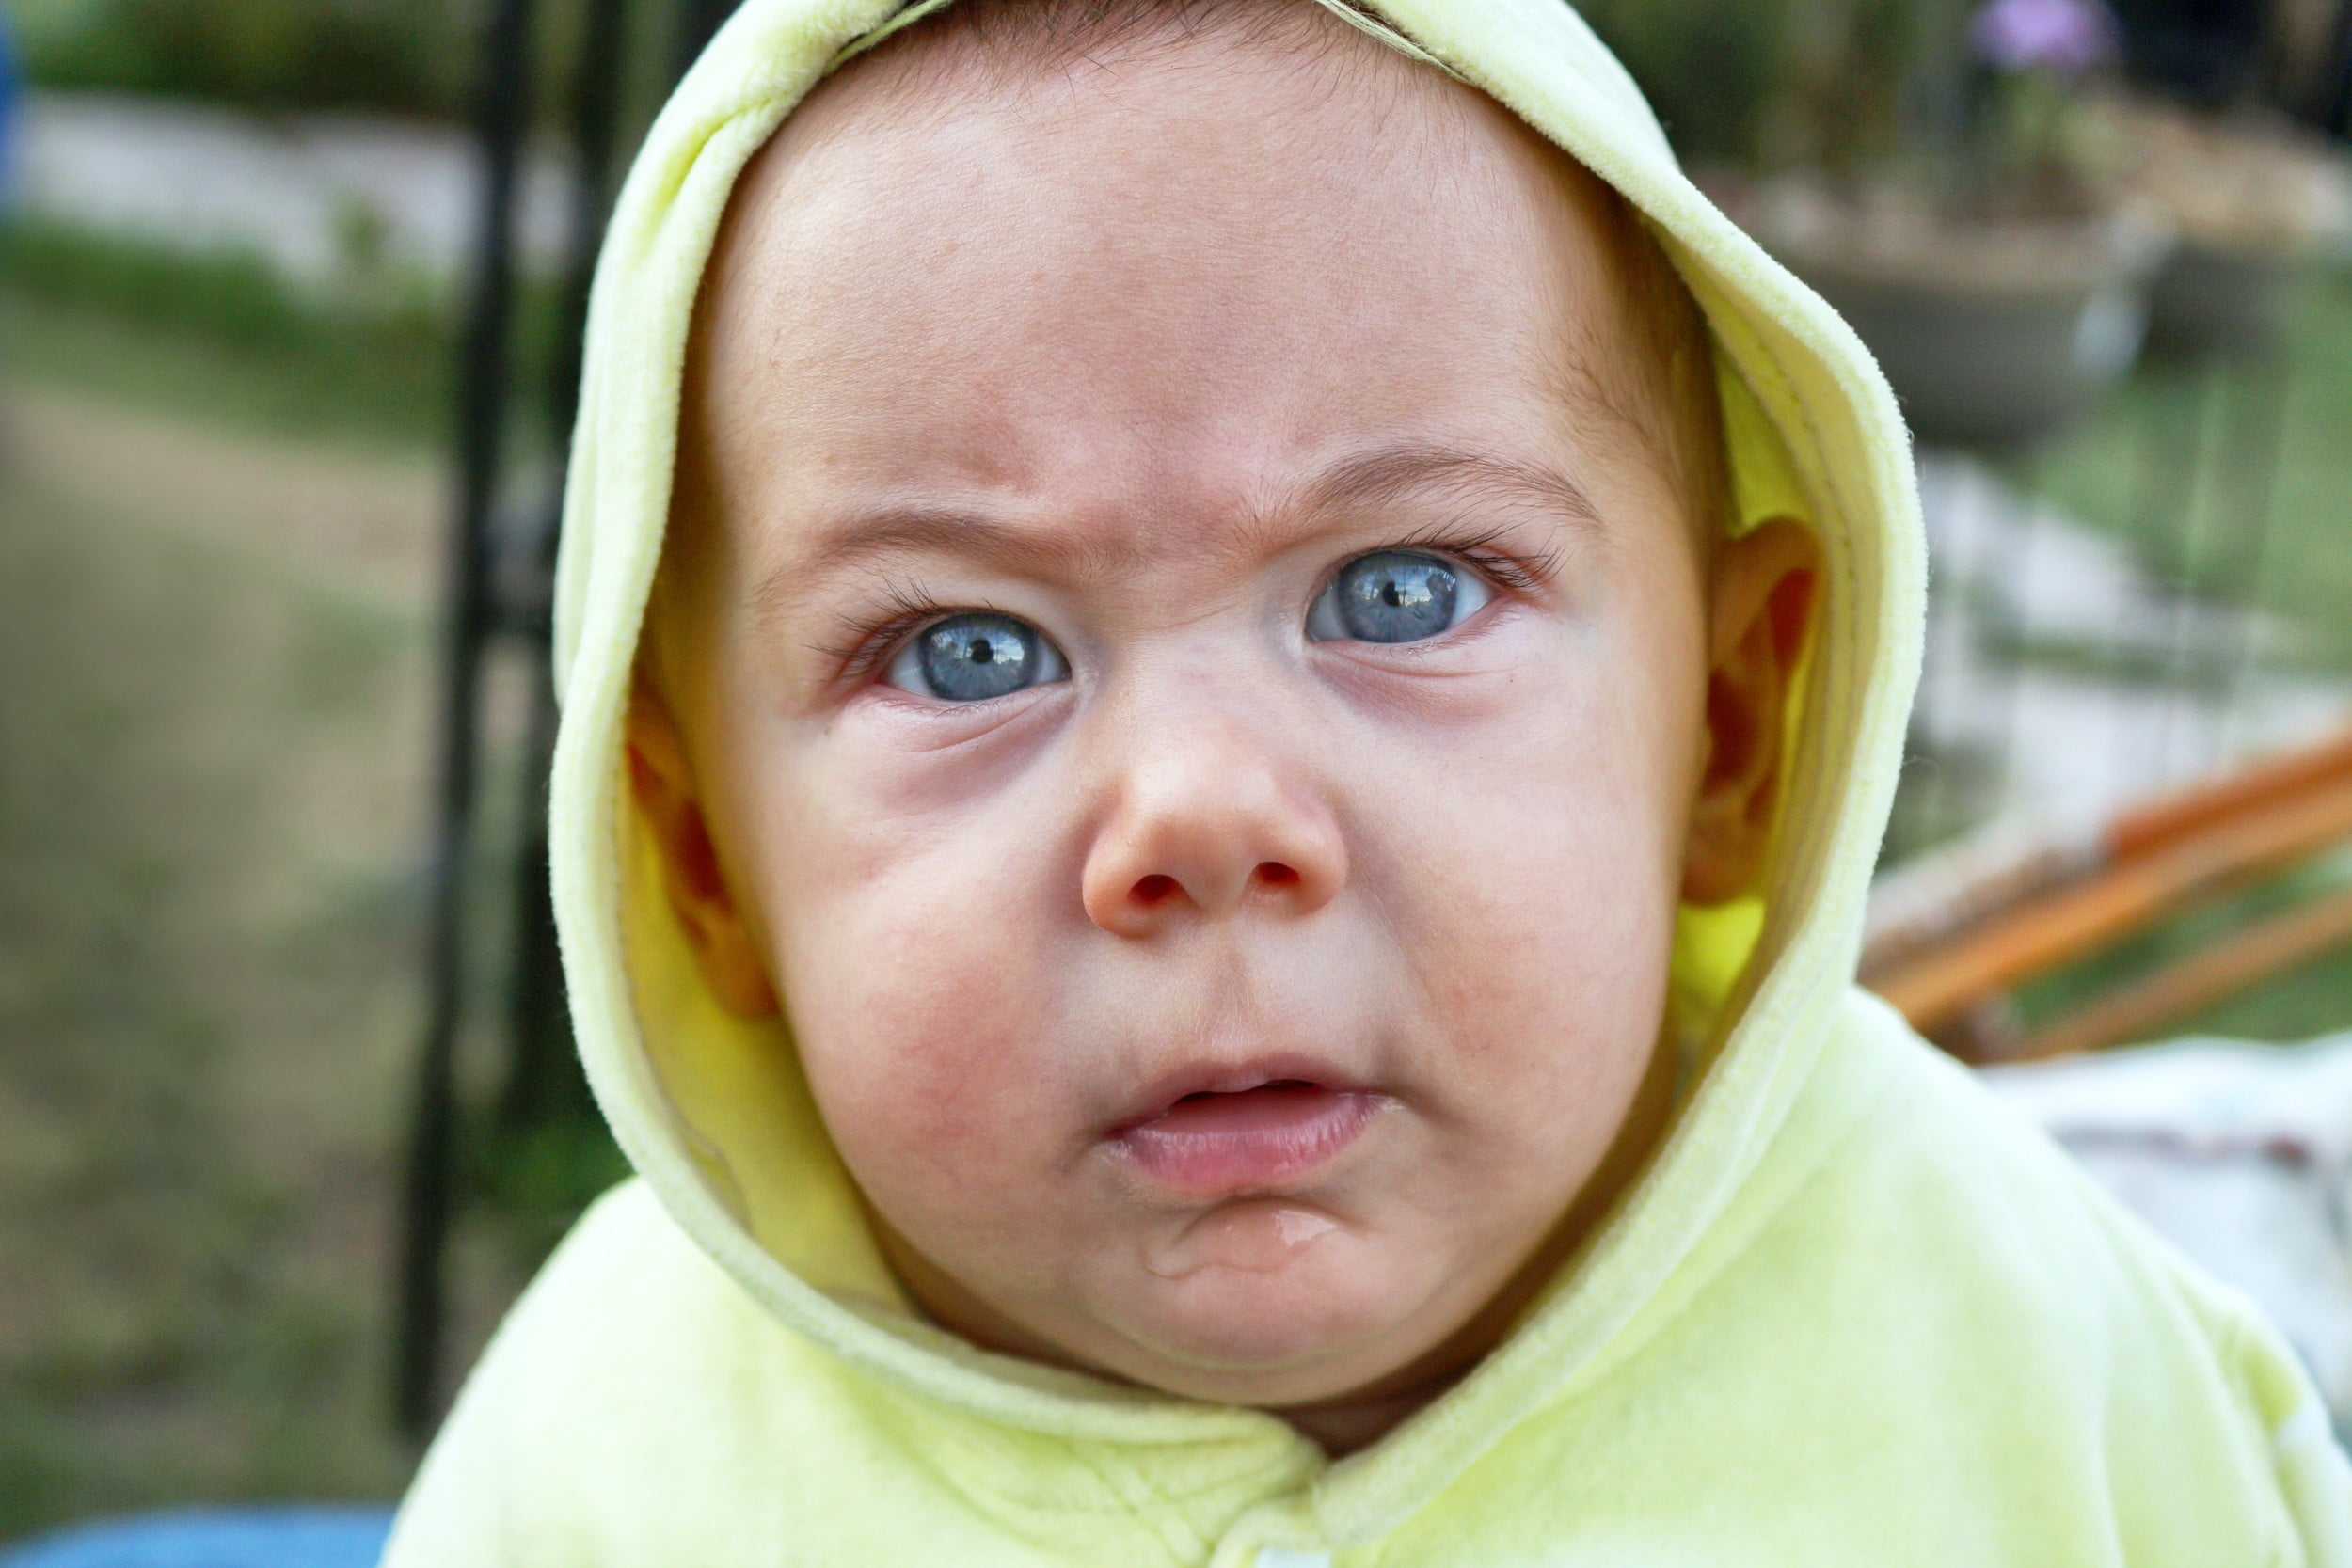 baby's green hoodie jacket, baby, blue eyes, angry